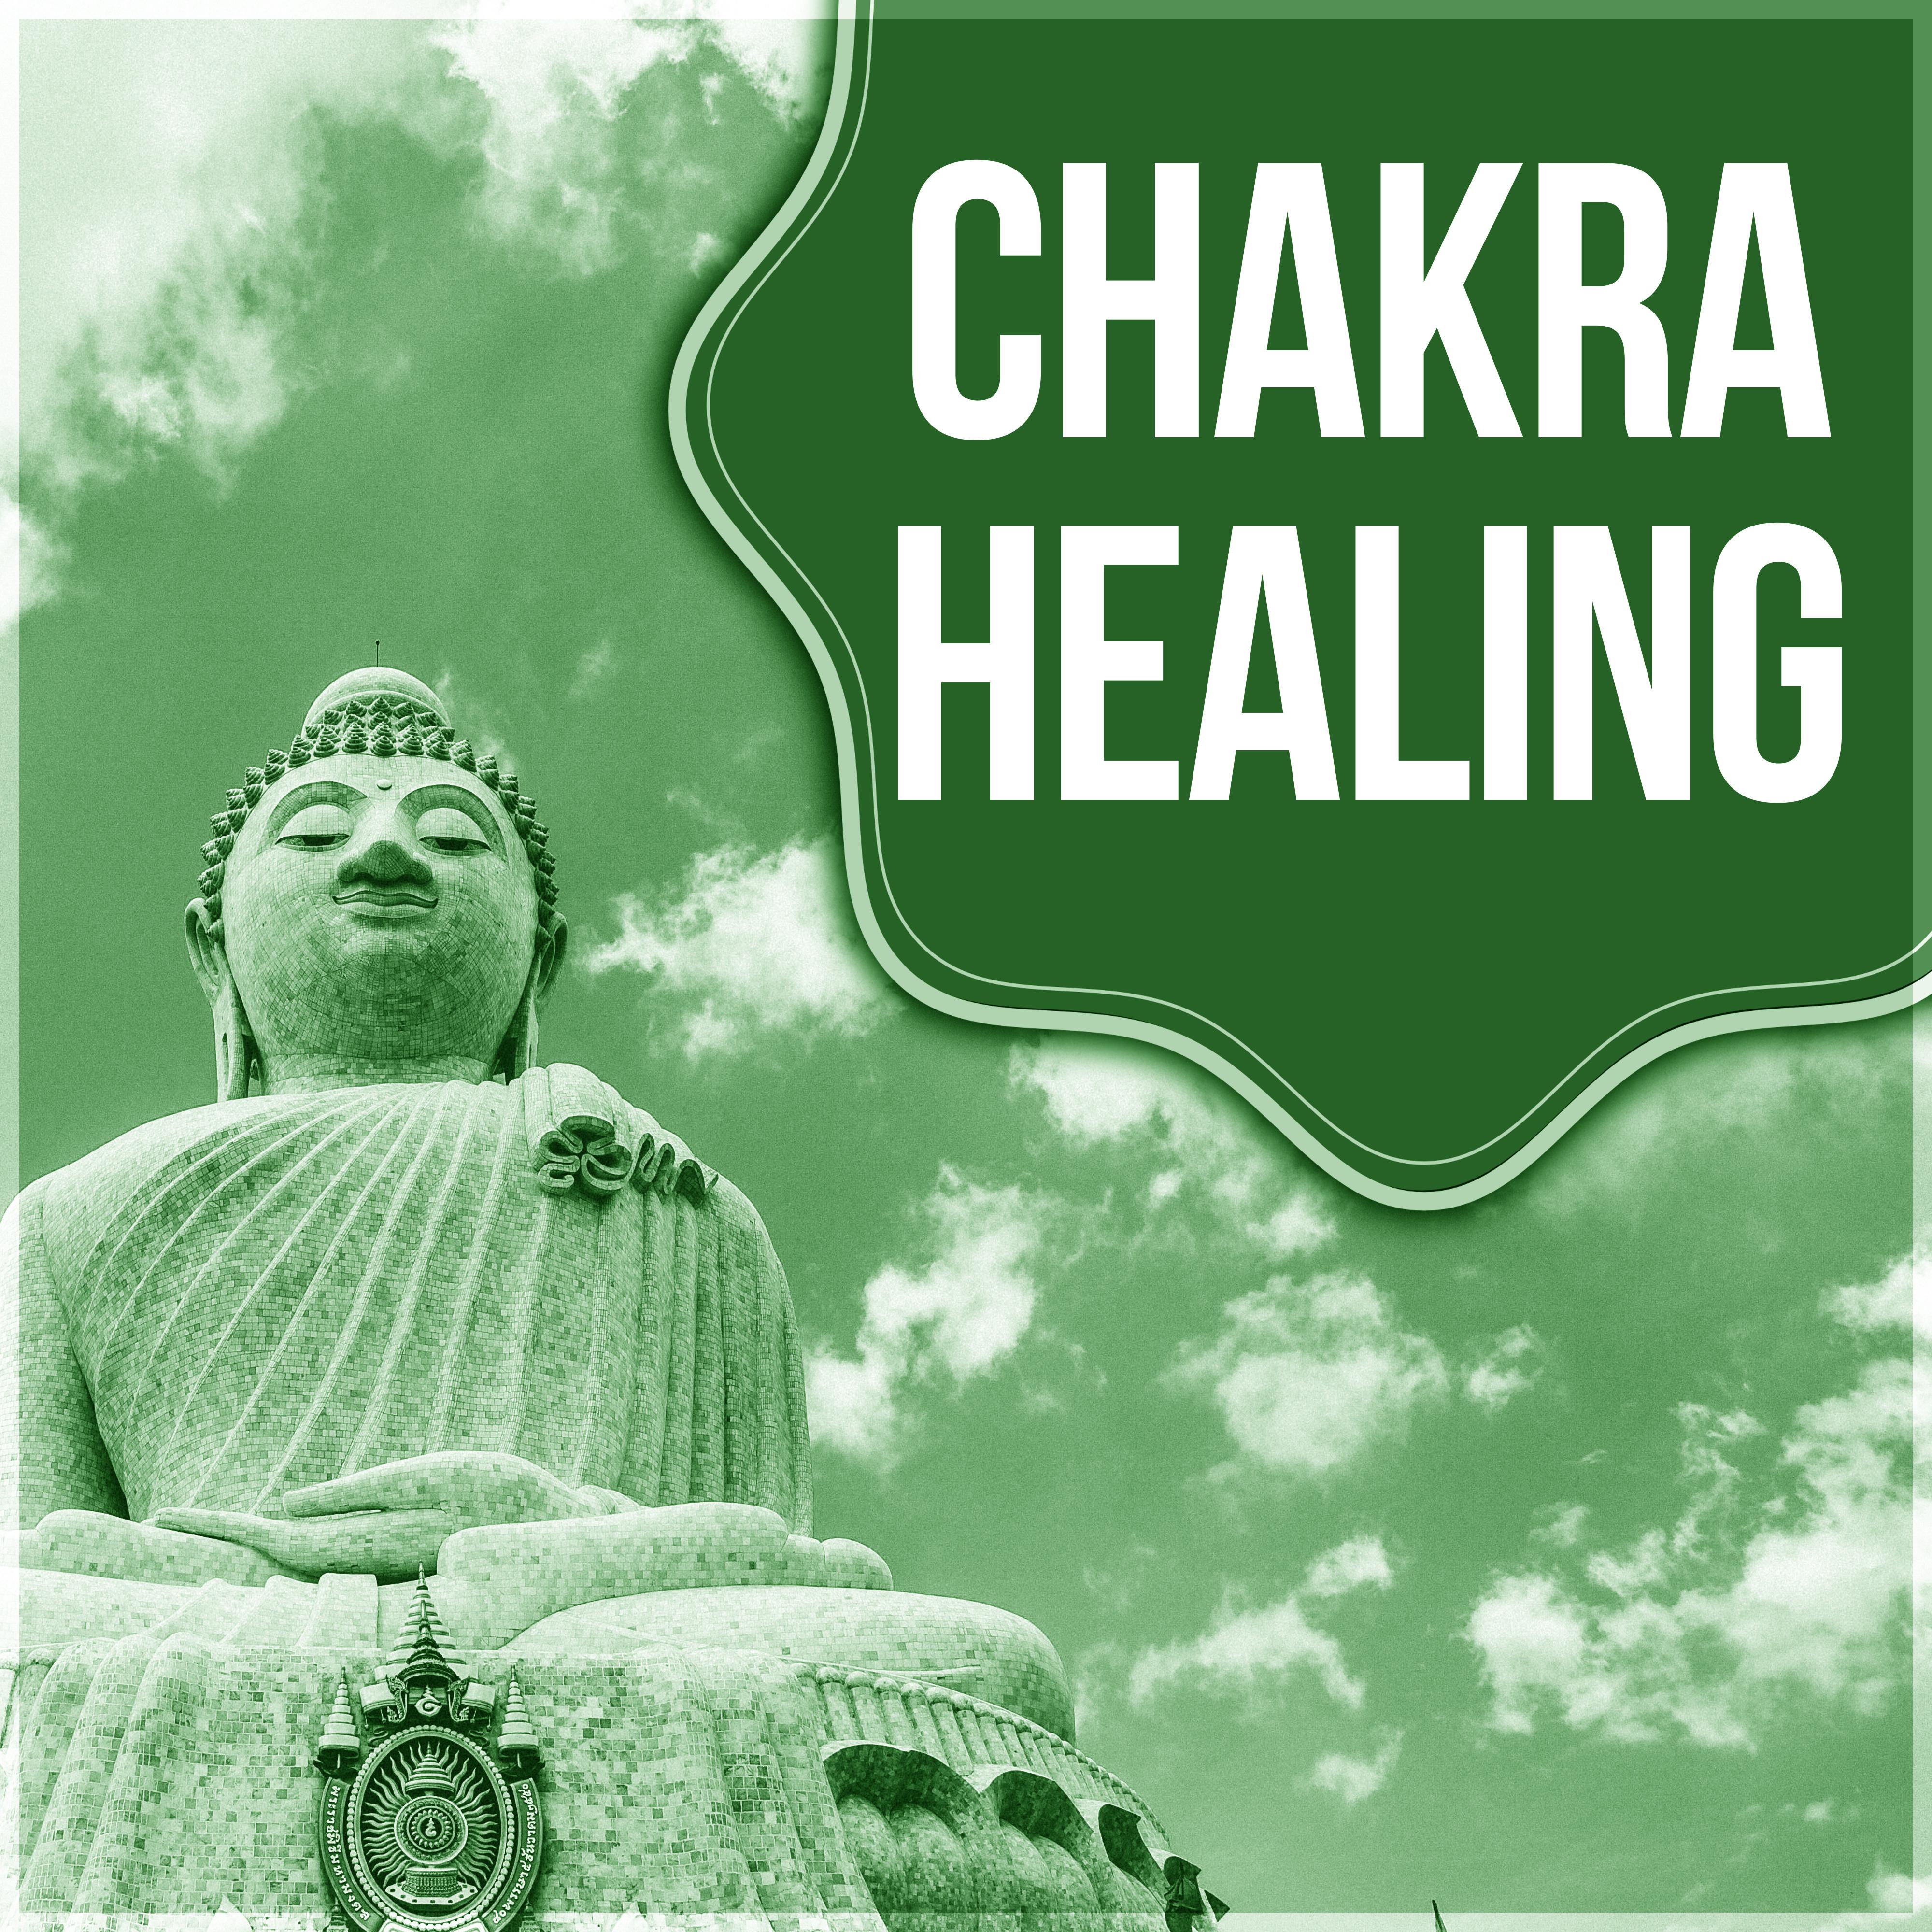 Chakra Healing  Calm Music for Yoga, New Age, Deep Music for Yoga Poses, Pure Meditation, Yoga for Weigh Loss, Soft Music for Relaxation